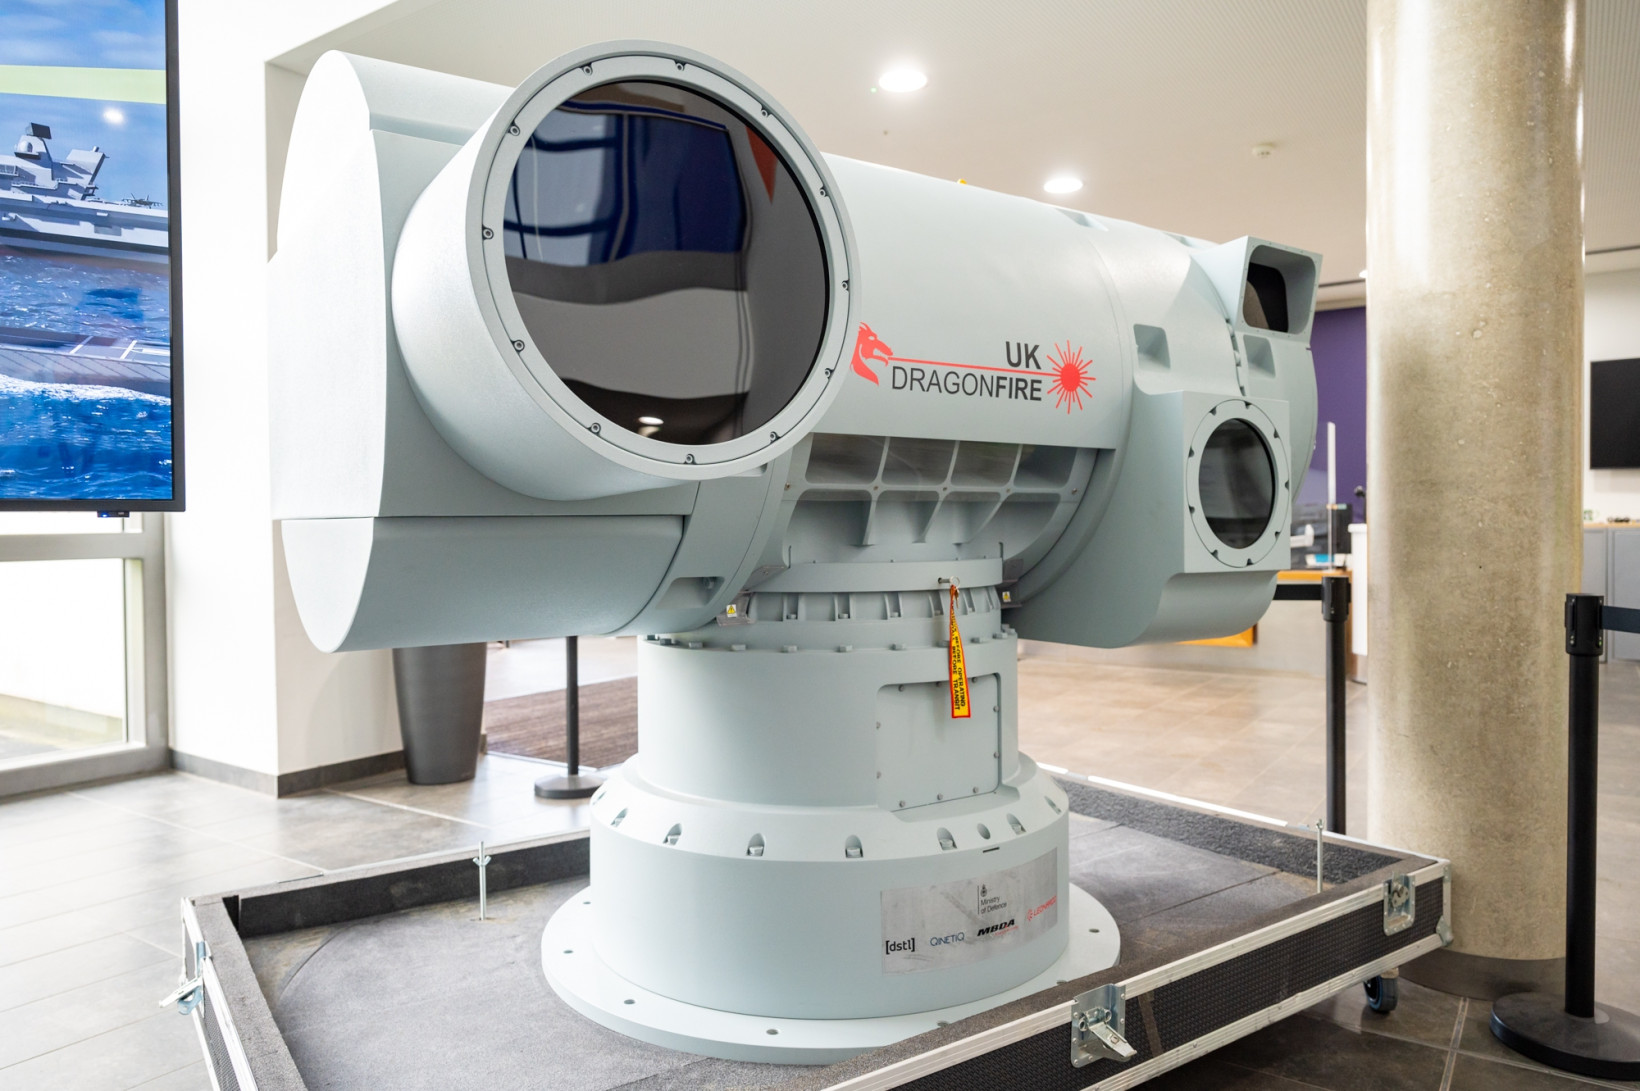 the dragonfire laser weapon